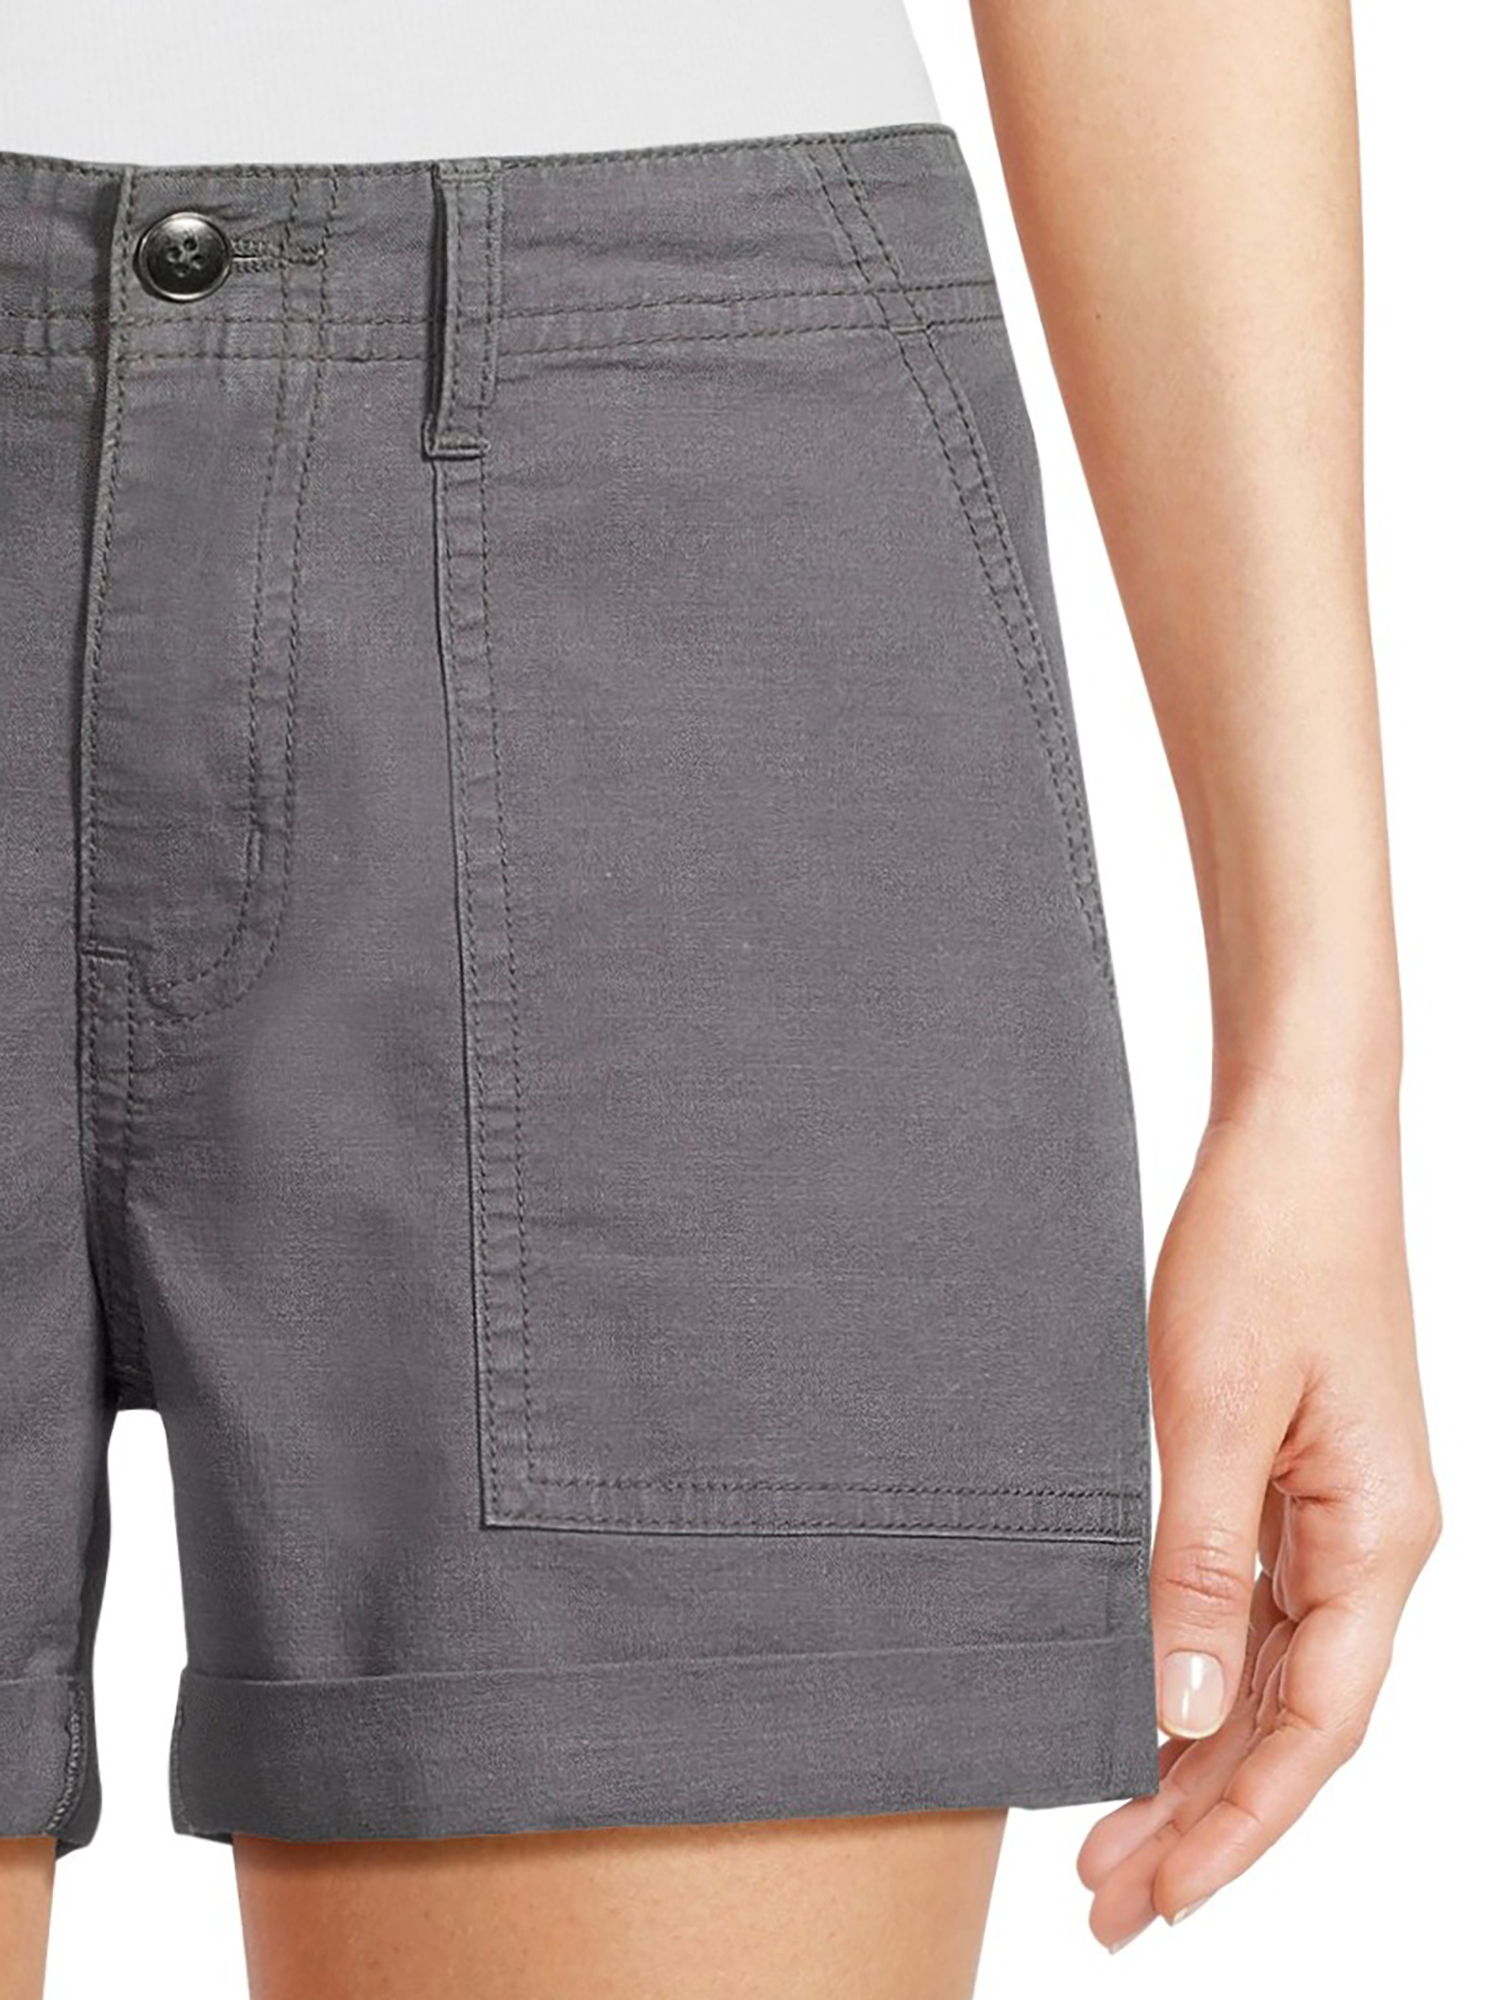 Time and Tru Women's and Women's Plus Utility Cuff Shorts, 4" Inseam, Sizes 2-20 - image 4 of 6